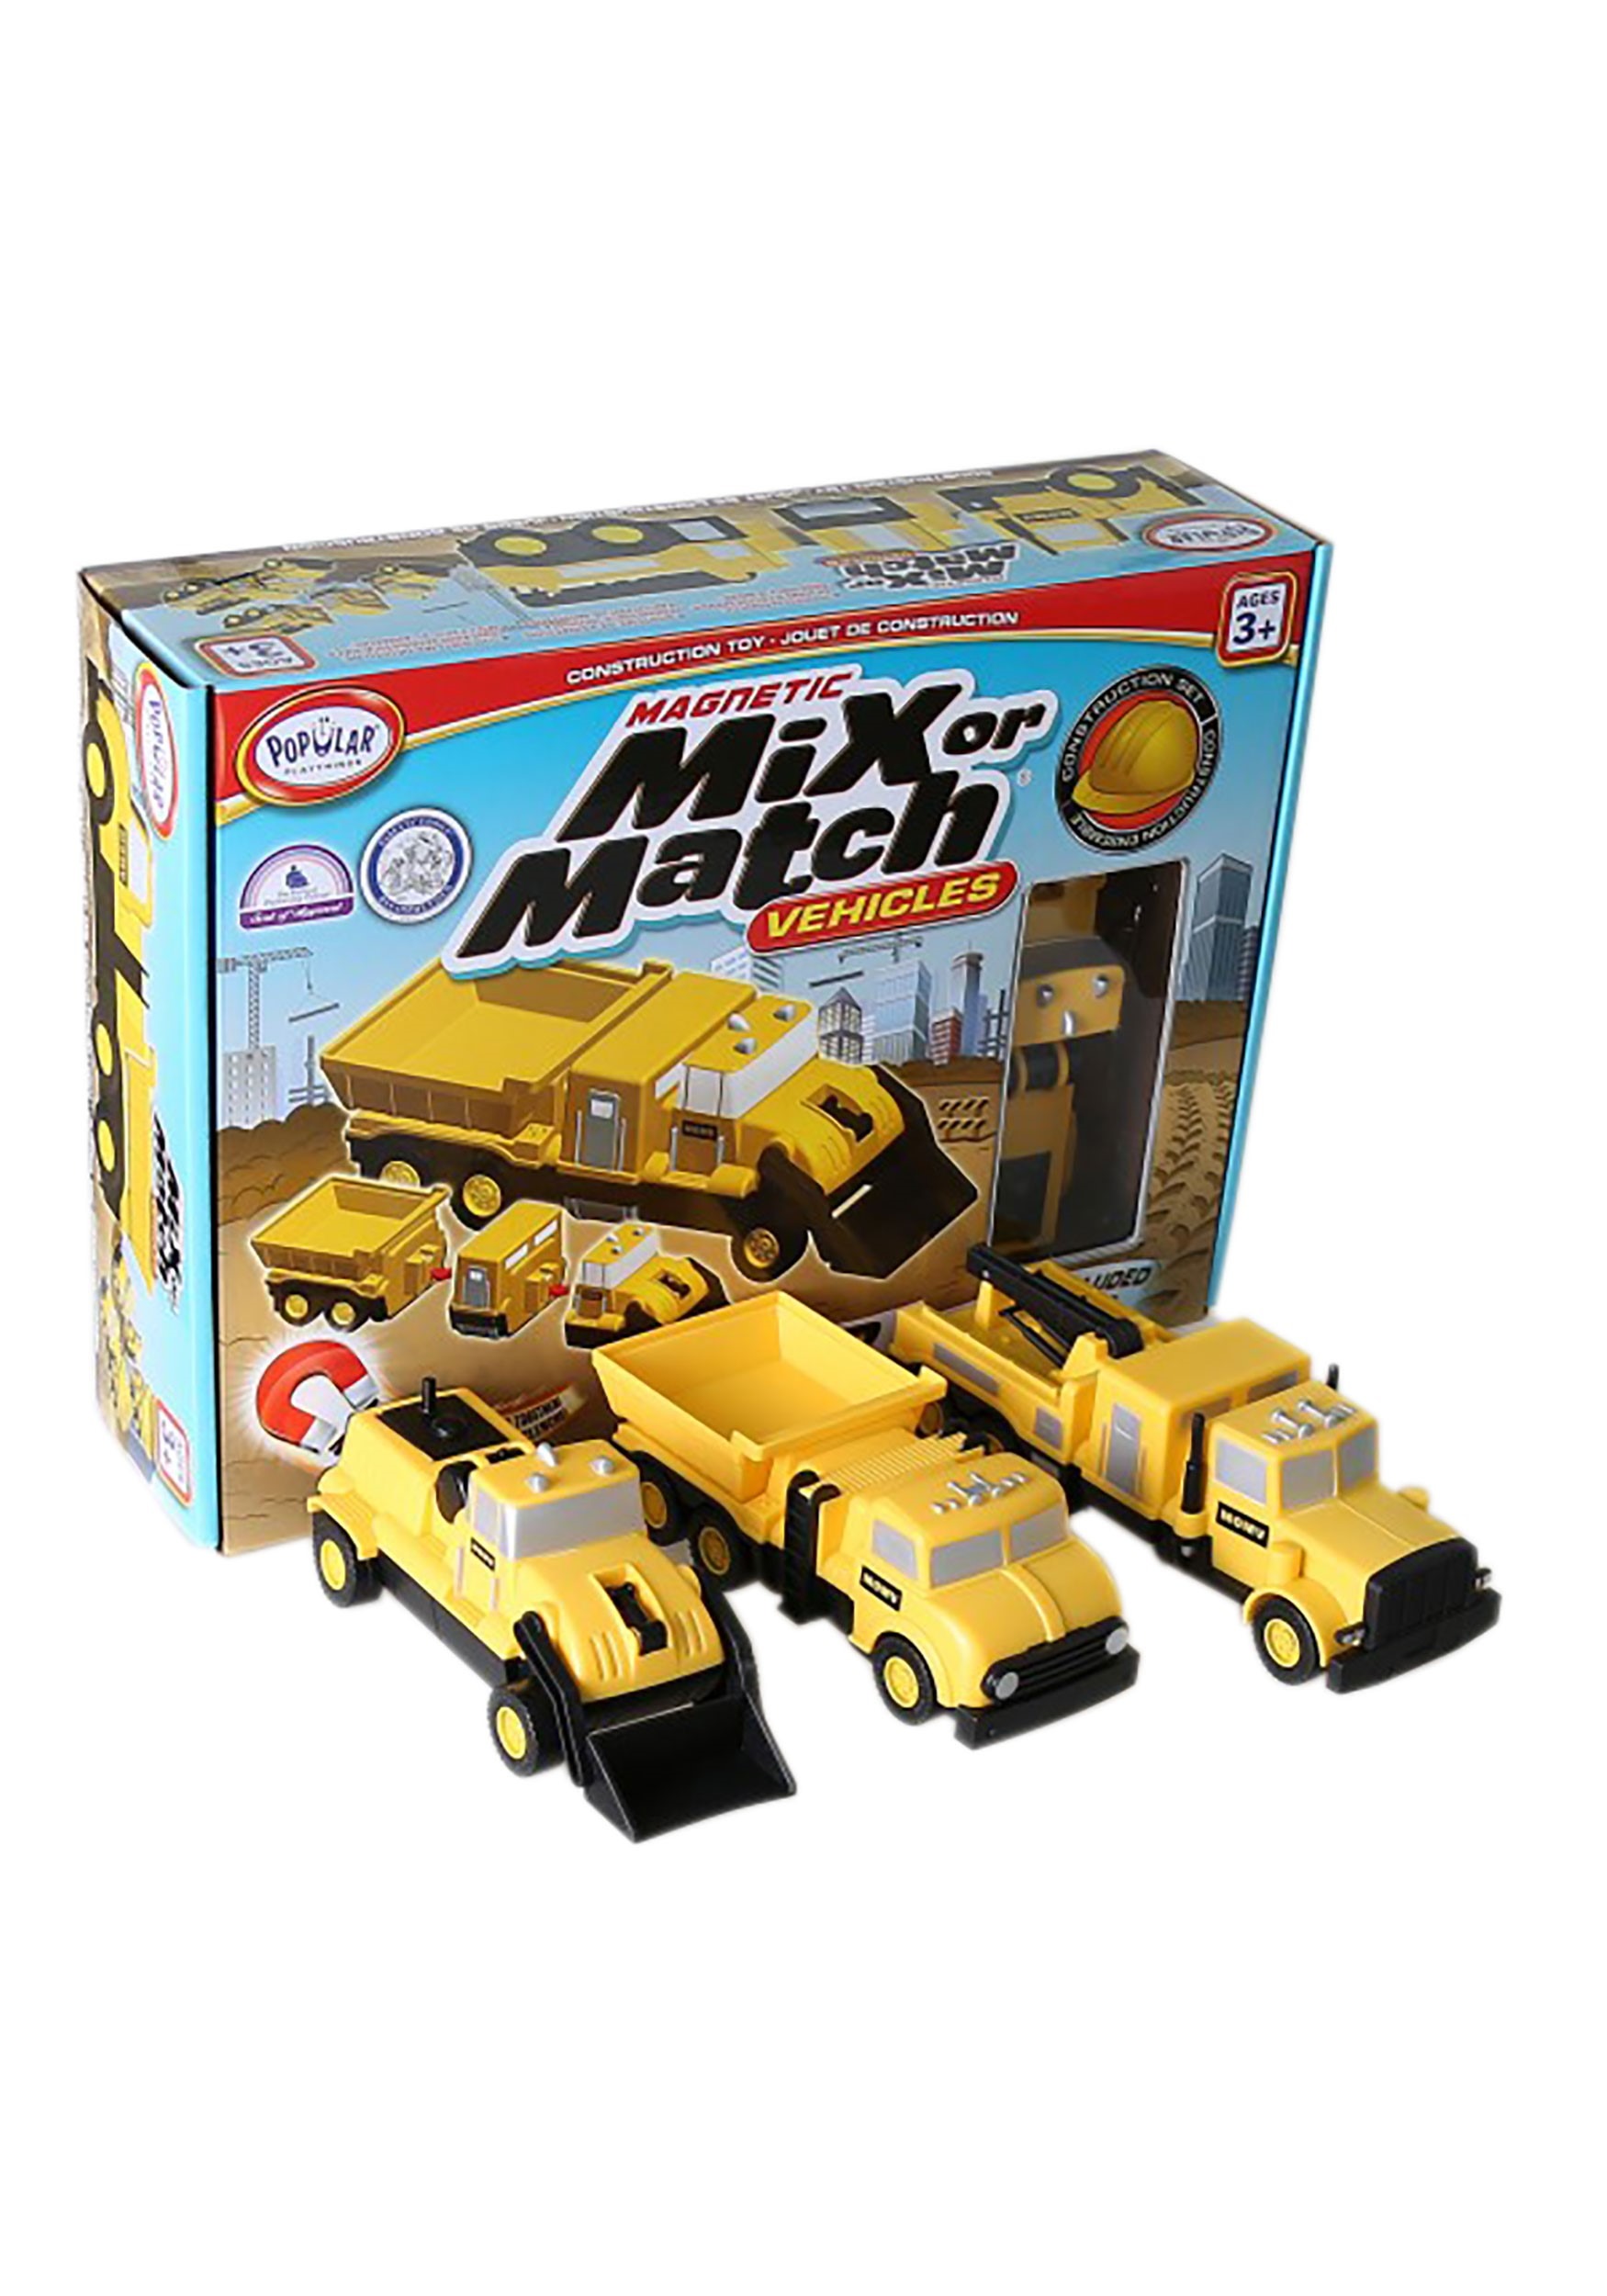 Mix or Match Construction Vehicles